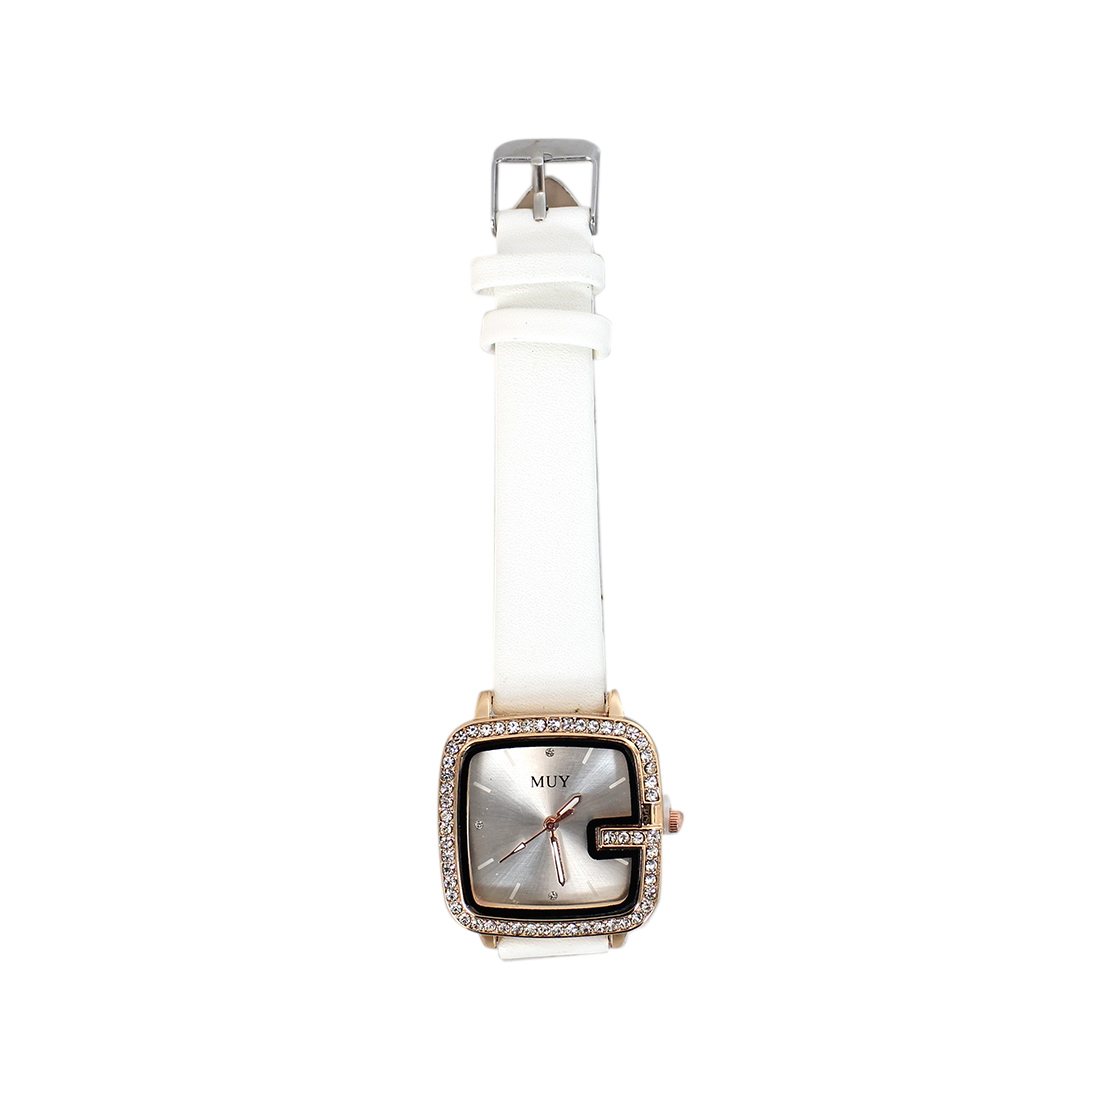 Plain strap with square shiny face